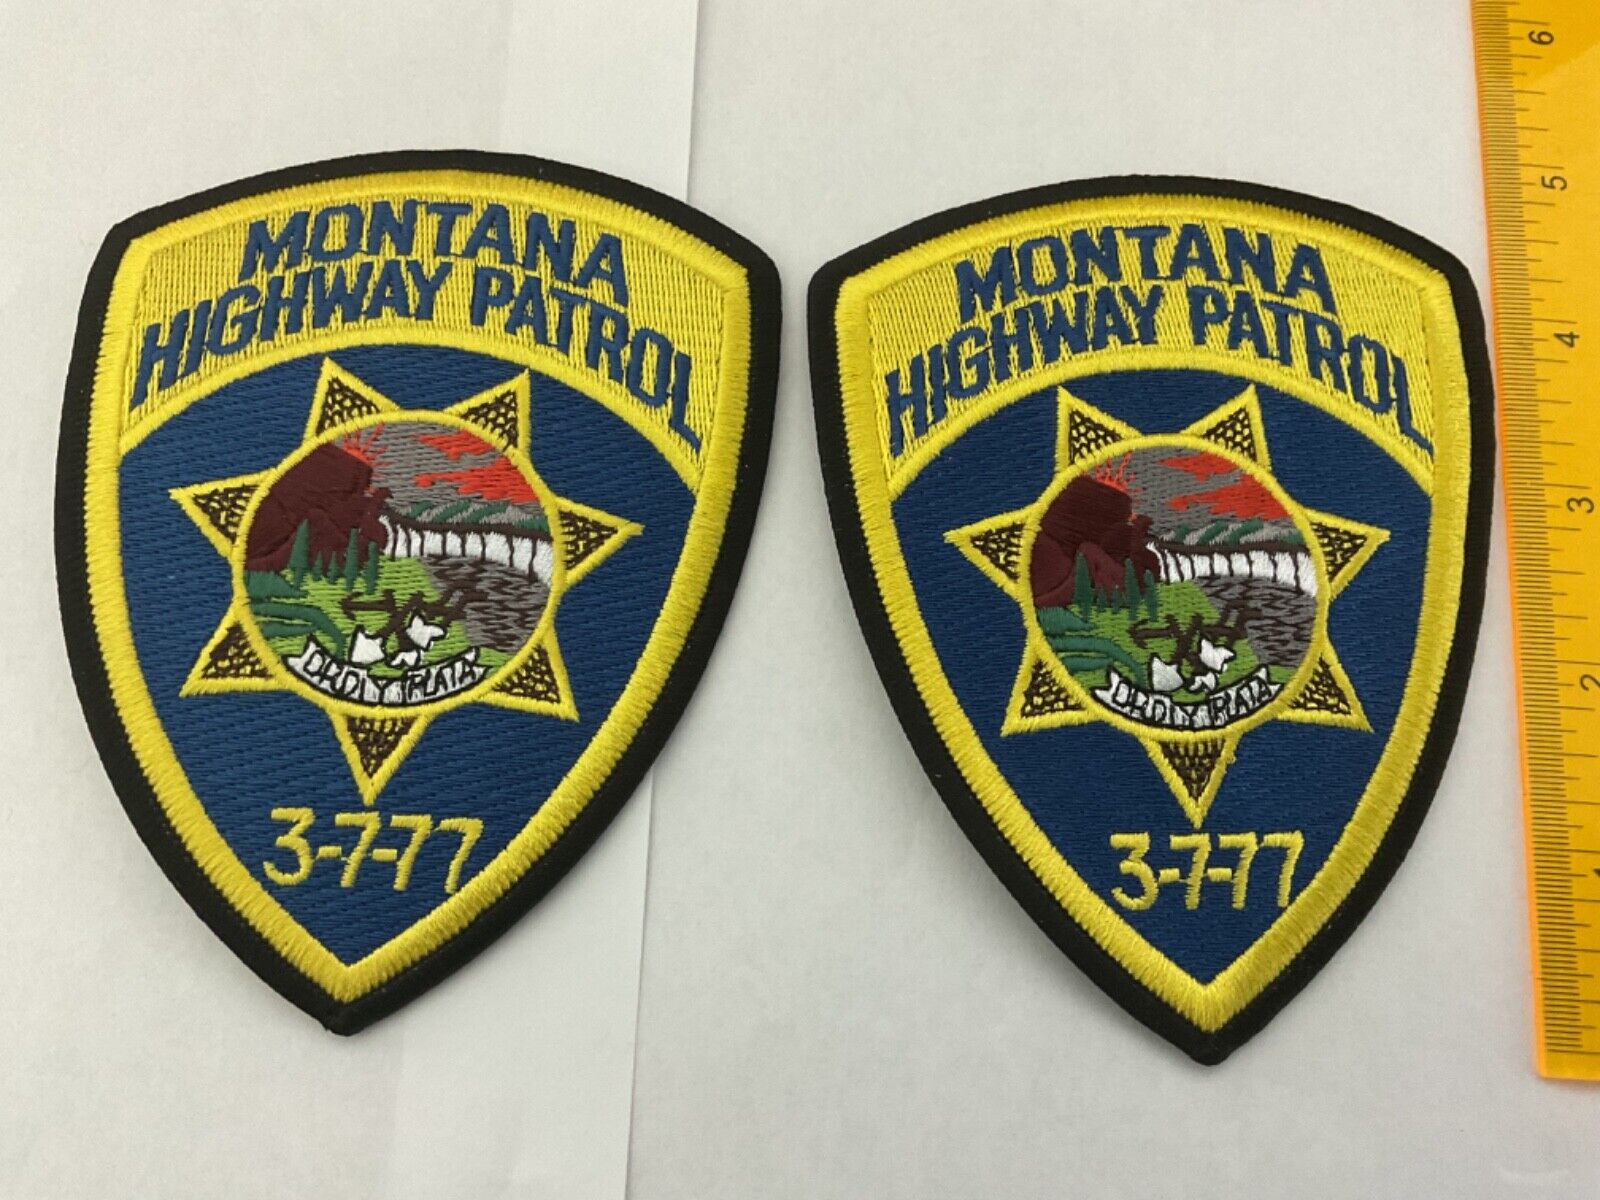 Montana Highway Patrol collectable Patch Set 2 pieces